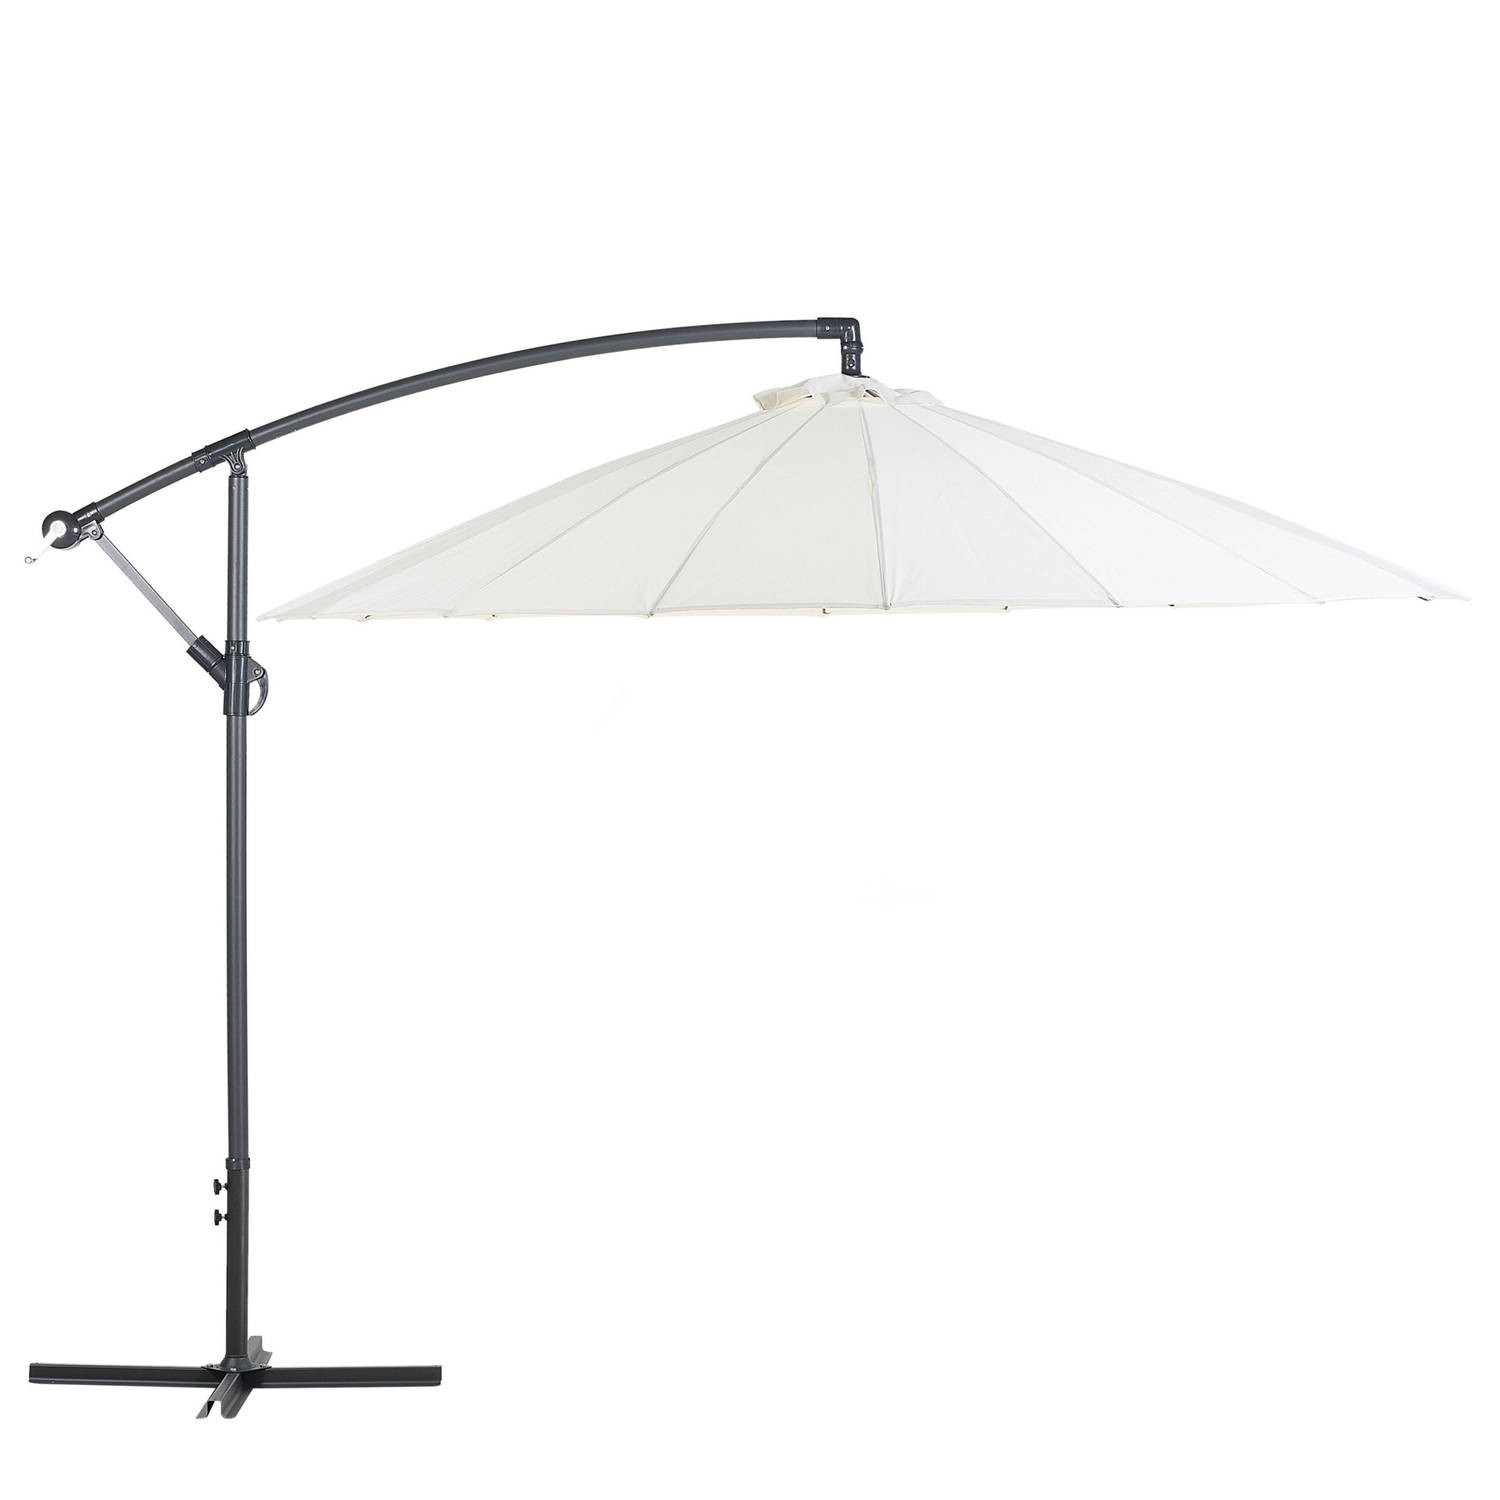 Beliani CALABRIA - Cantilever parasol-Beige-Polyester